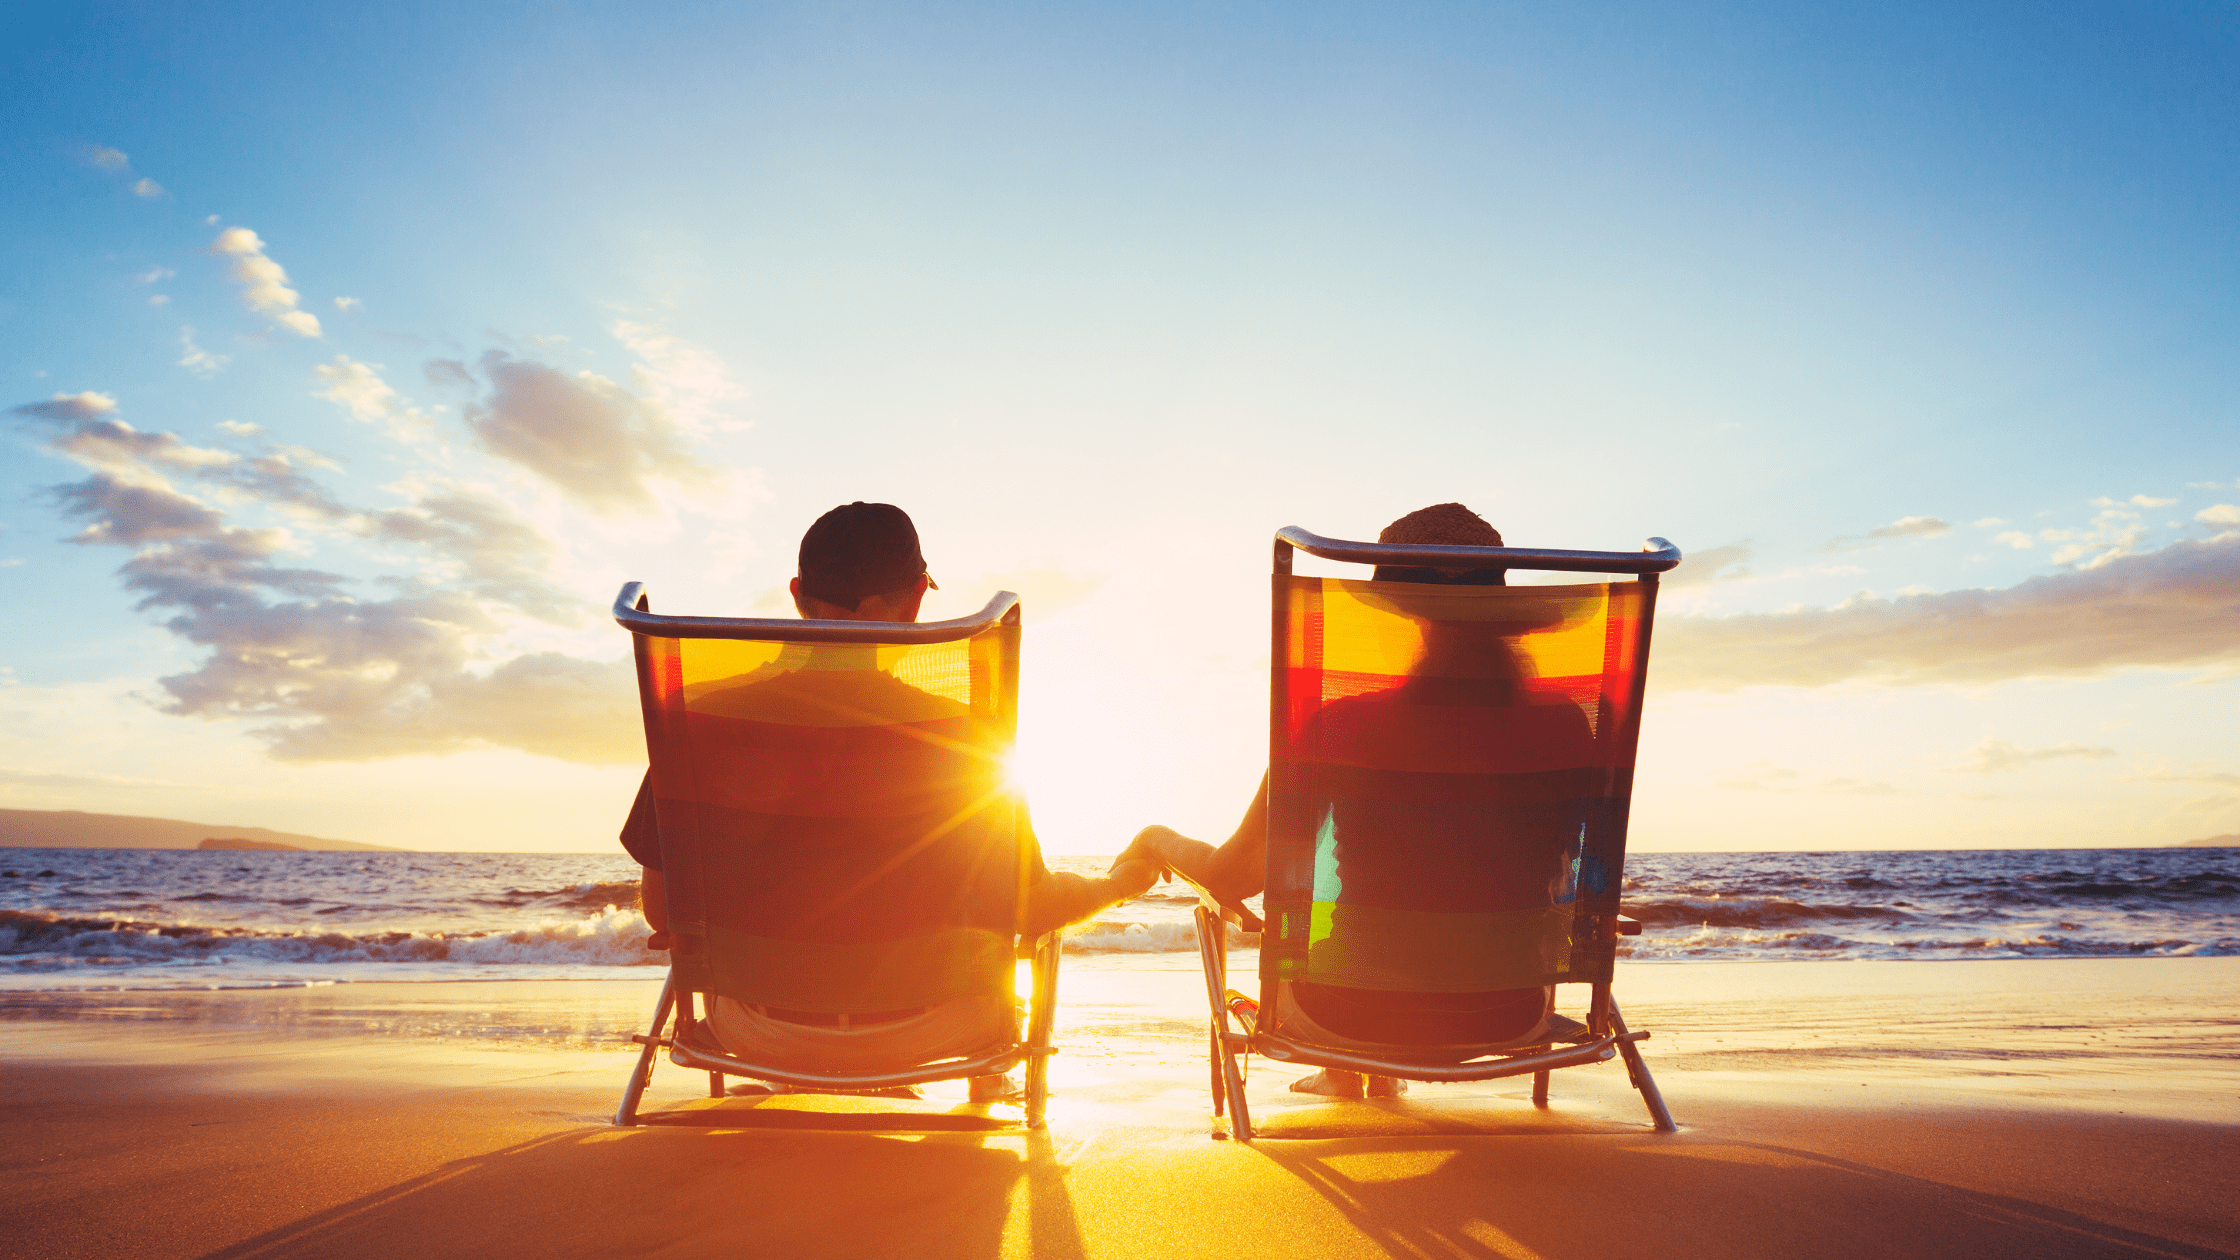 Are You About To Retire? Here's How Your Retirement Portfolio Should Look